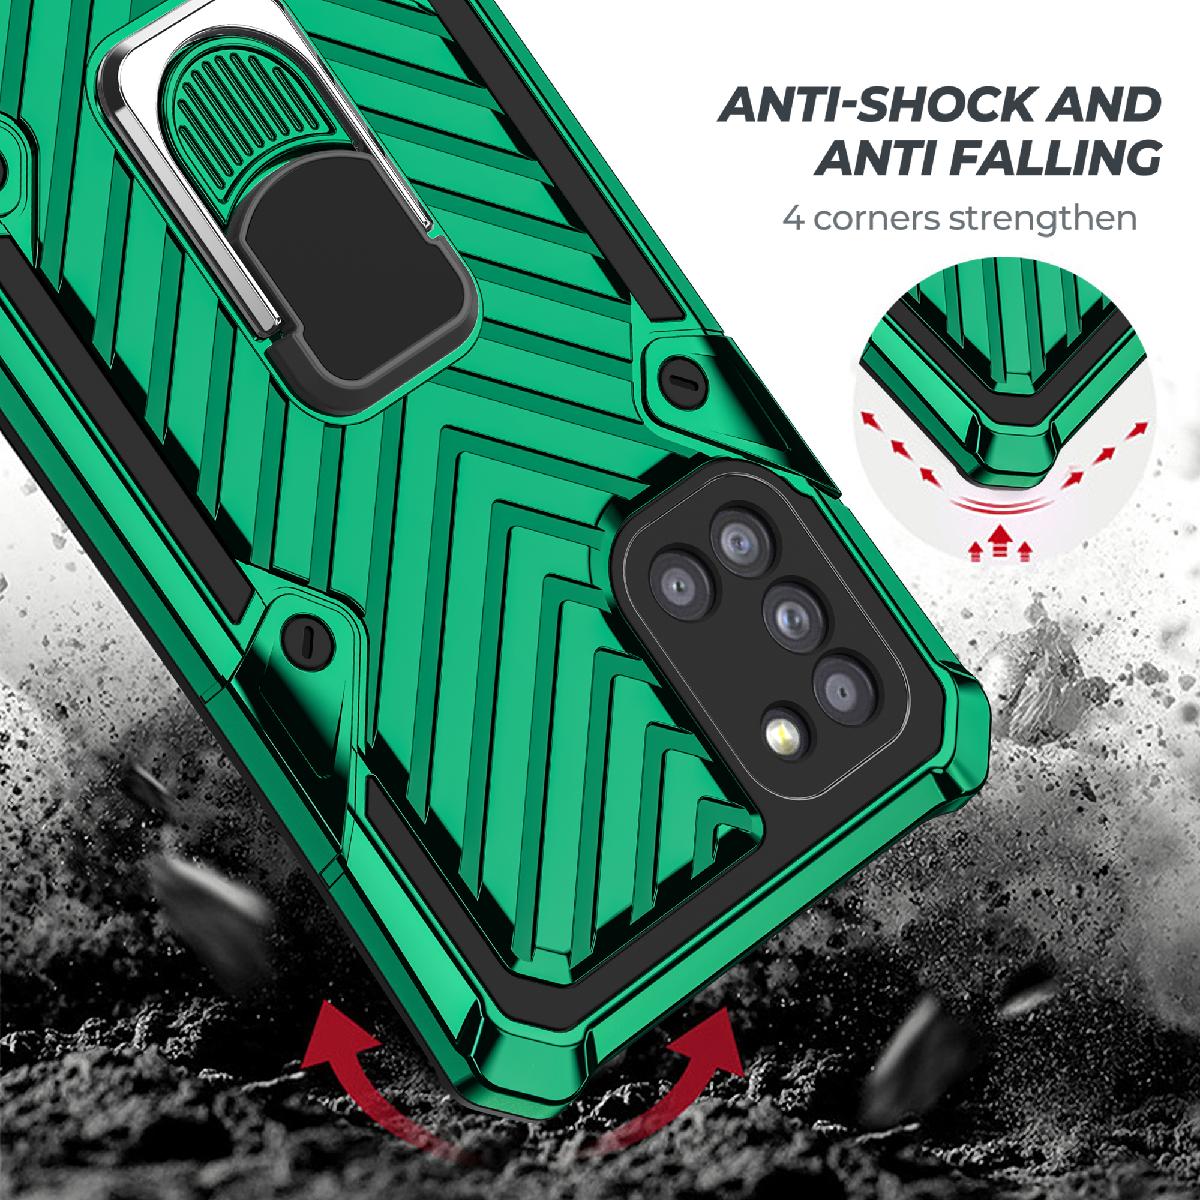 Reiko Kickstand Anti-Shock And Anti Falling Case for SAMSUNG GALAXY A31 In Green